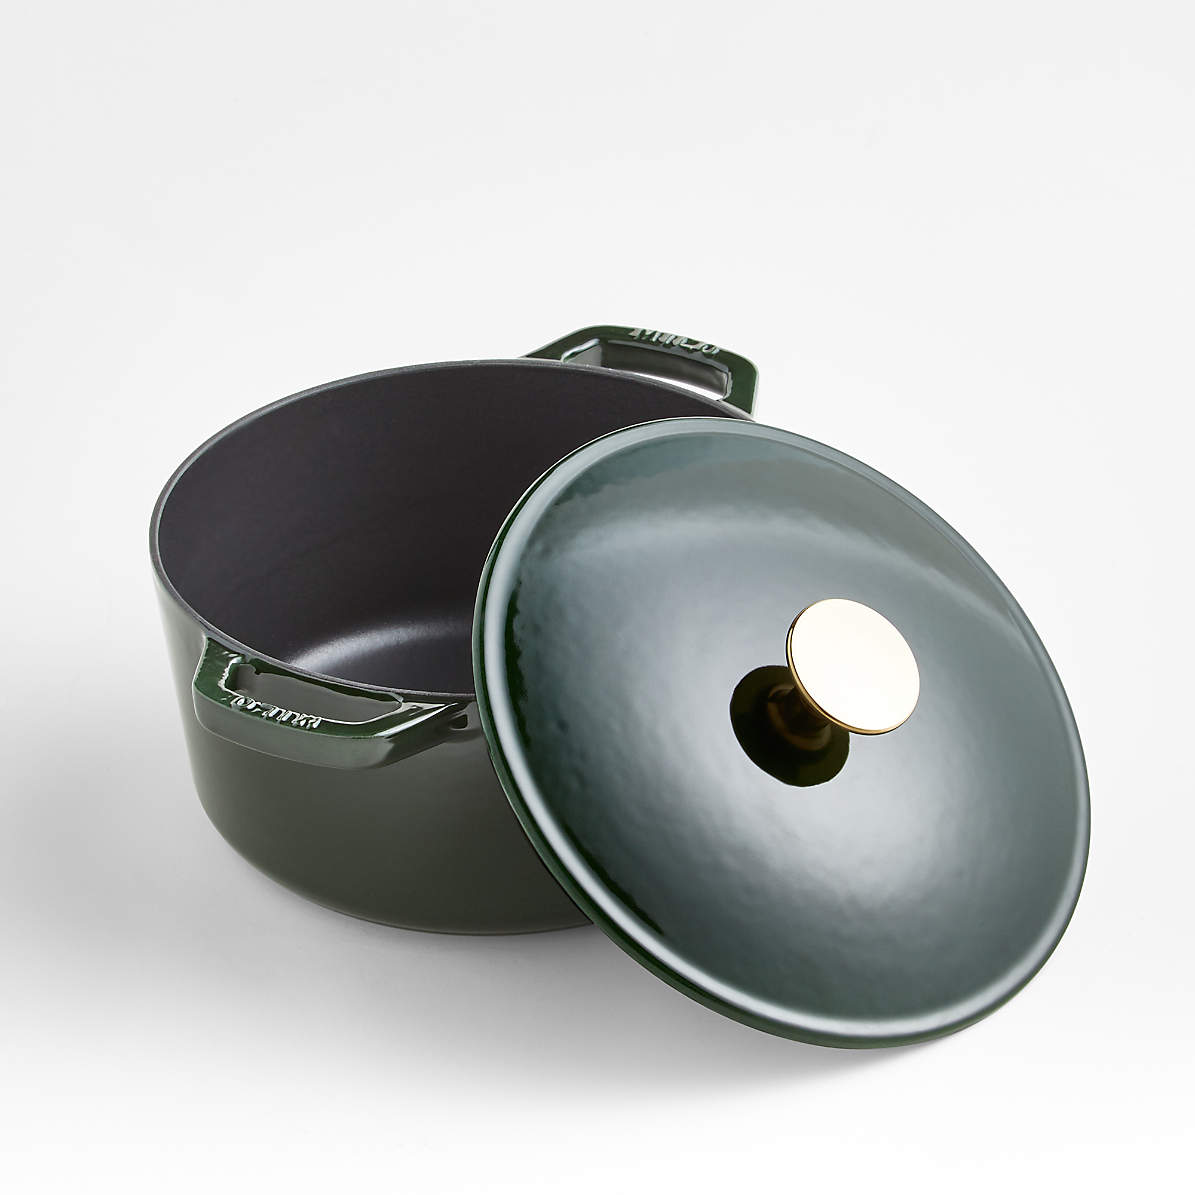 Kana Lifestyle Milo Cast Iron Covered Dutch Oven, Enameled In Emerald  Green, 5.5-Quart With Lid, By Kana